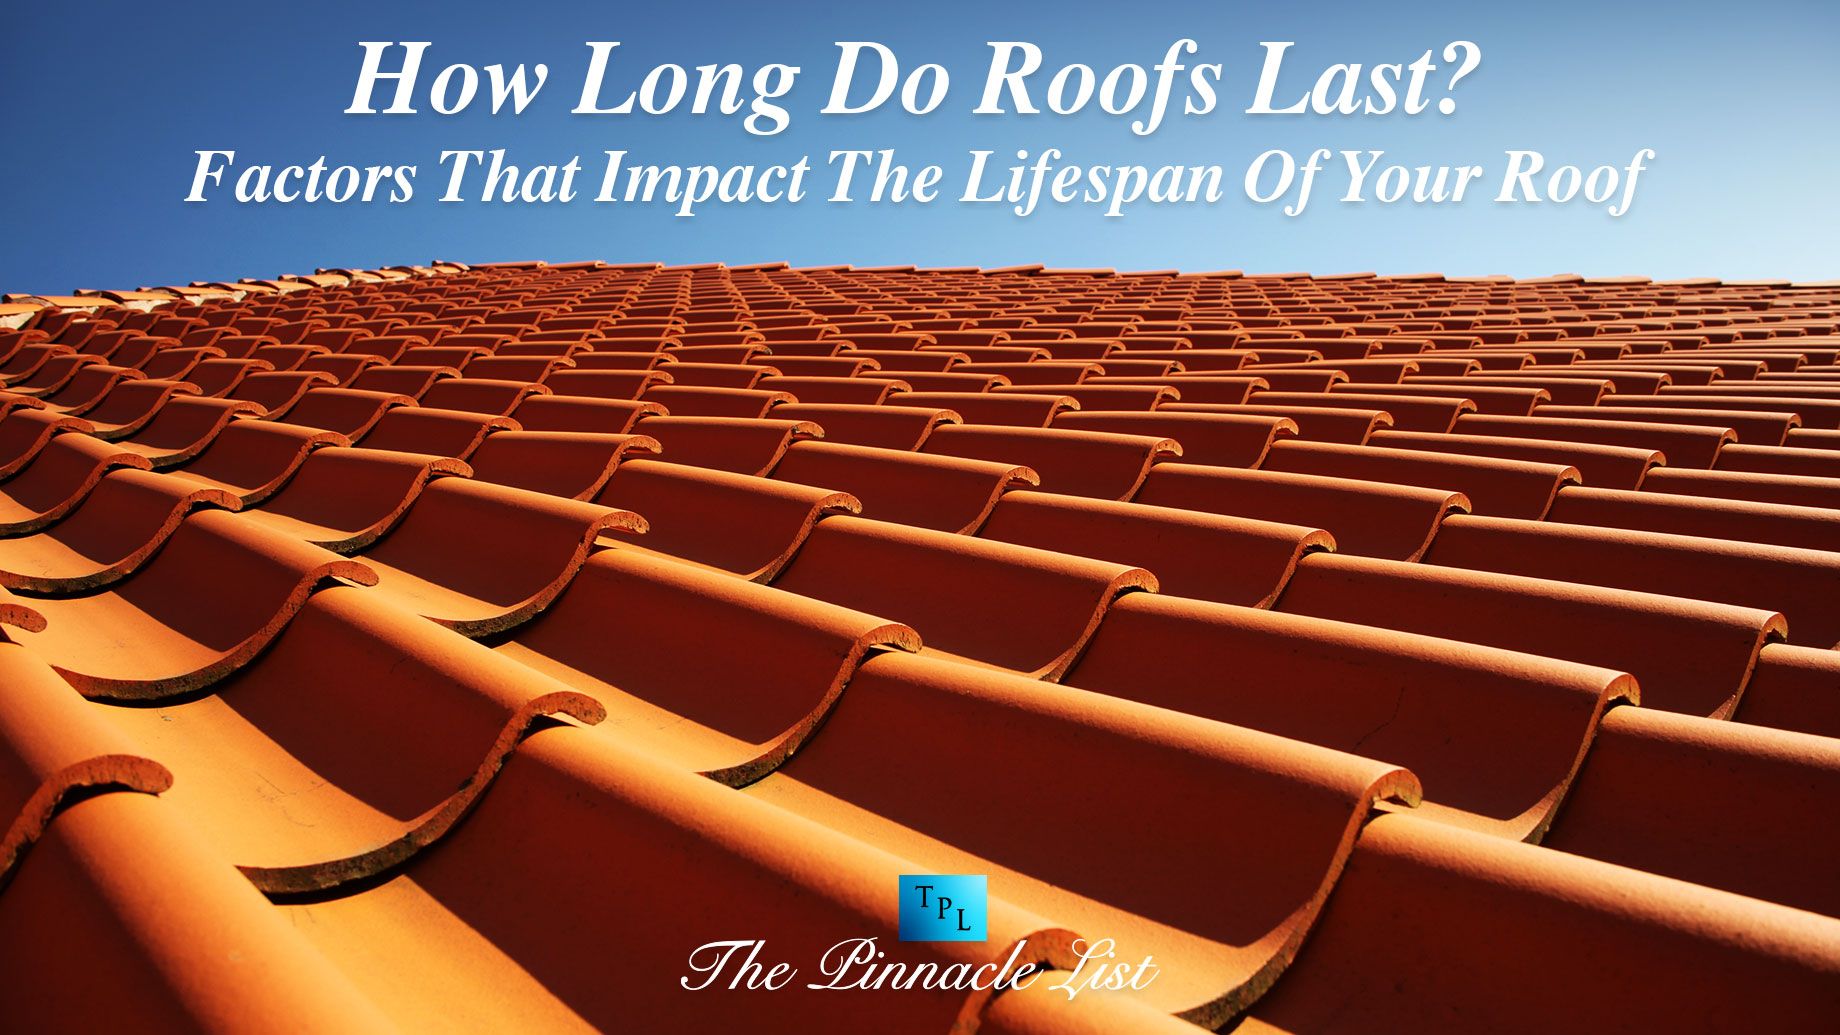 How Long Do Roofs Last? Factors That Impact The Lifespan Of Your Roof